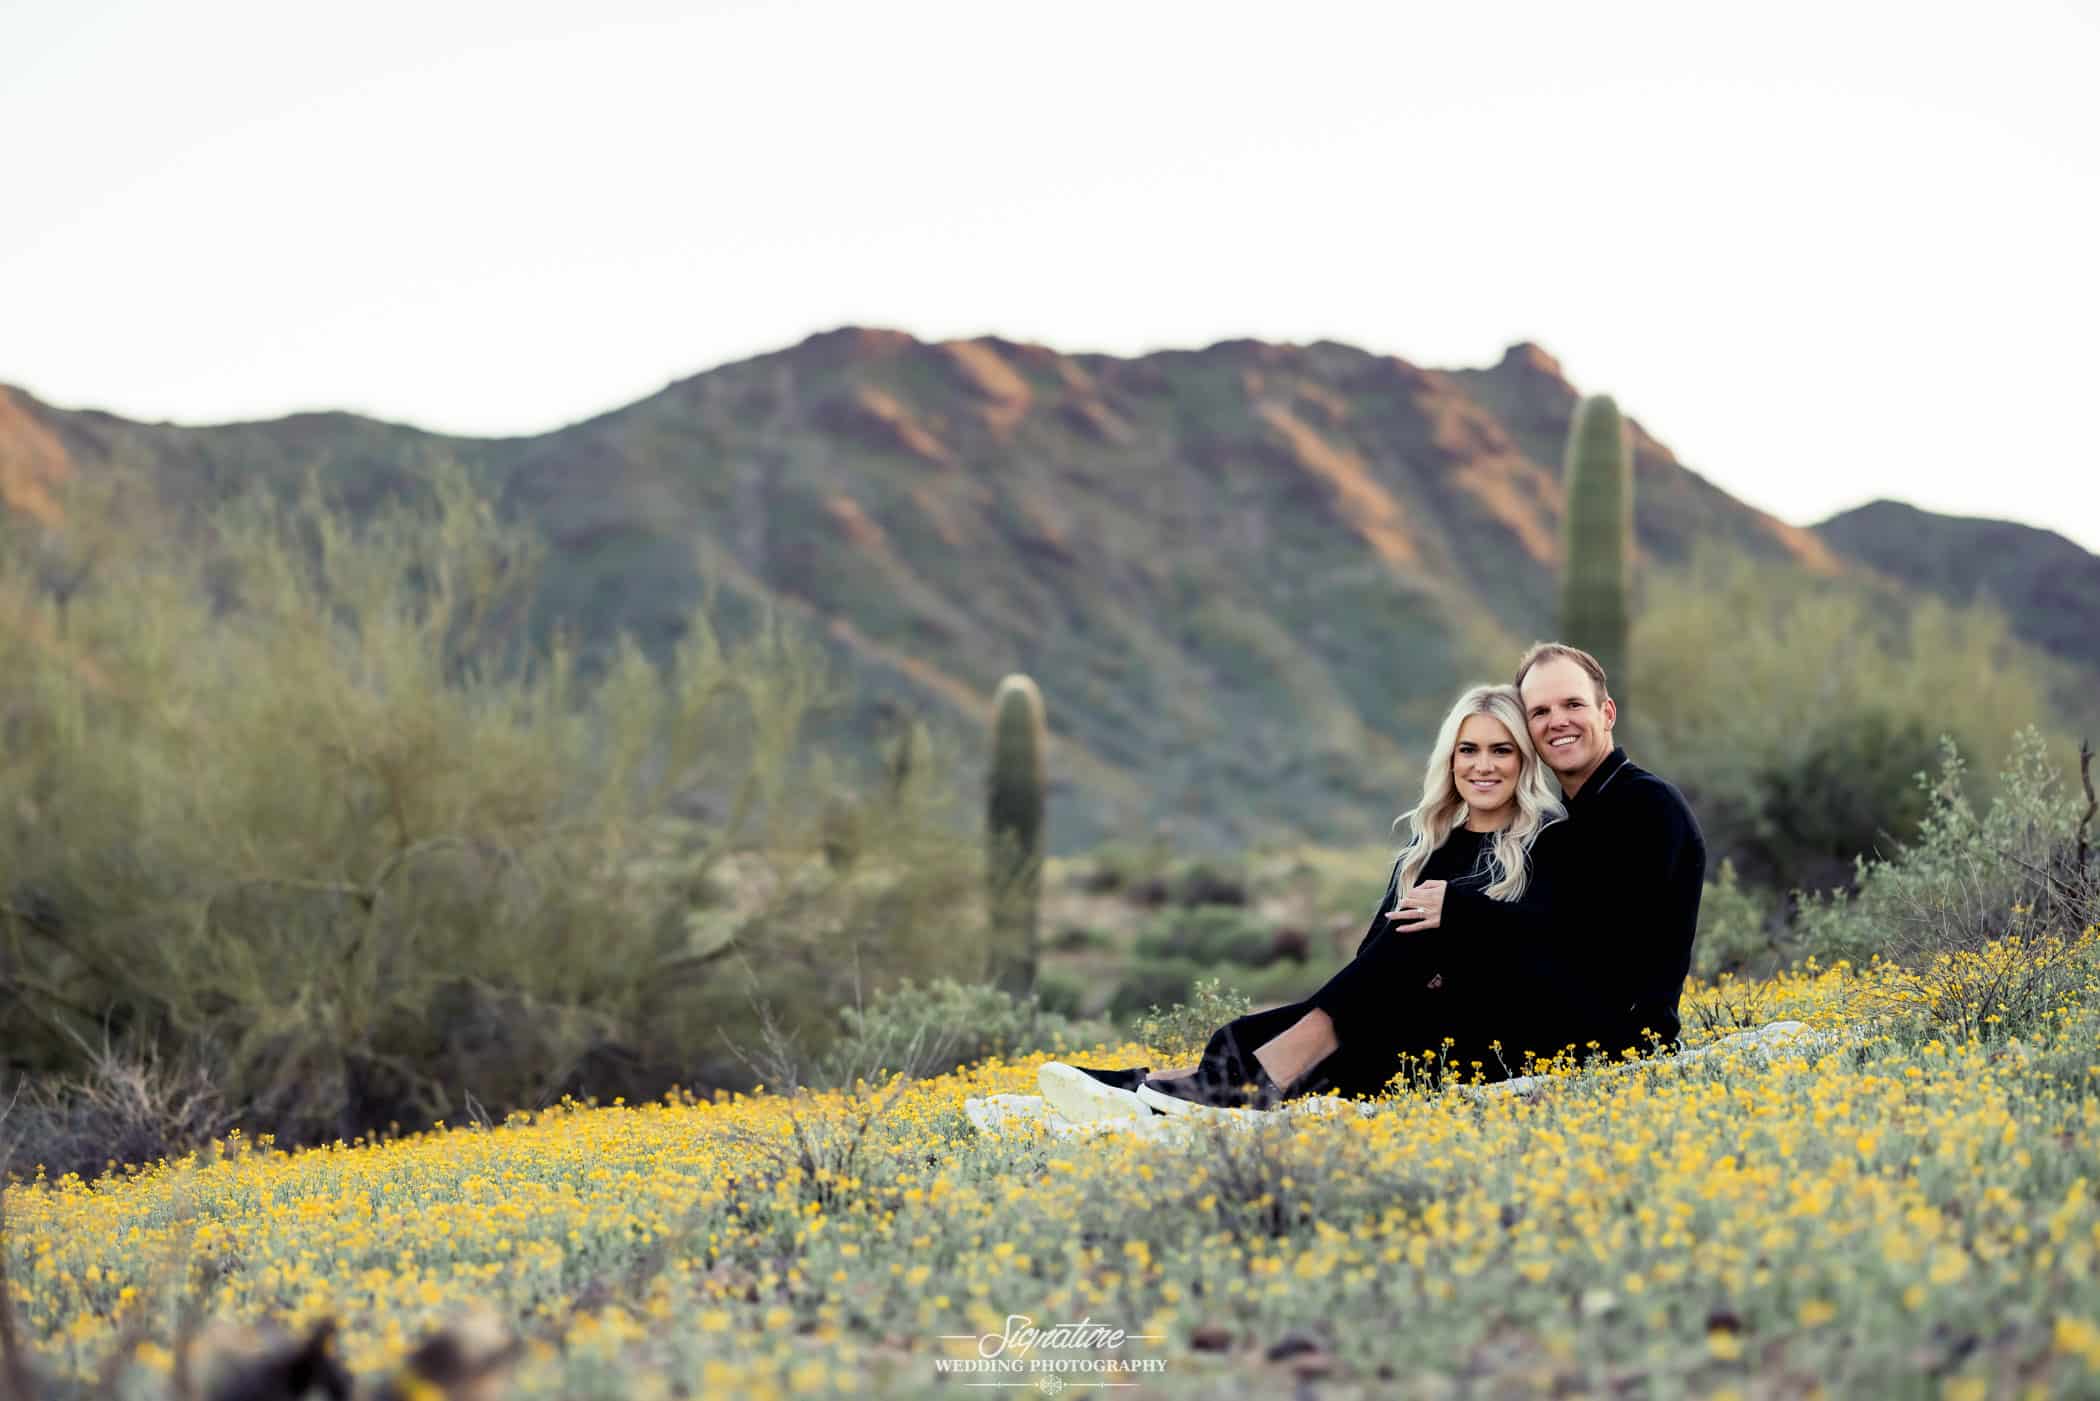 Sitting engagement photo in front of desert mountain